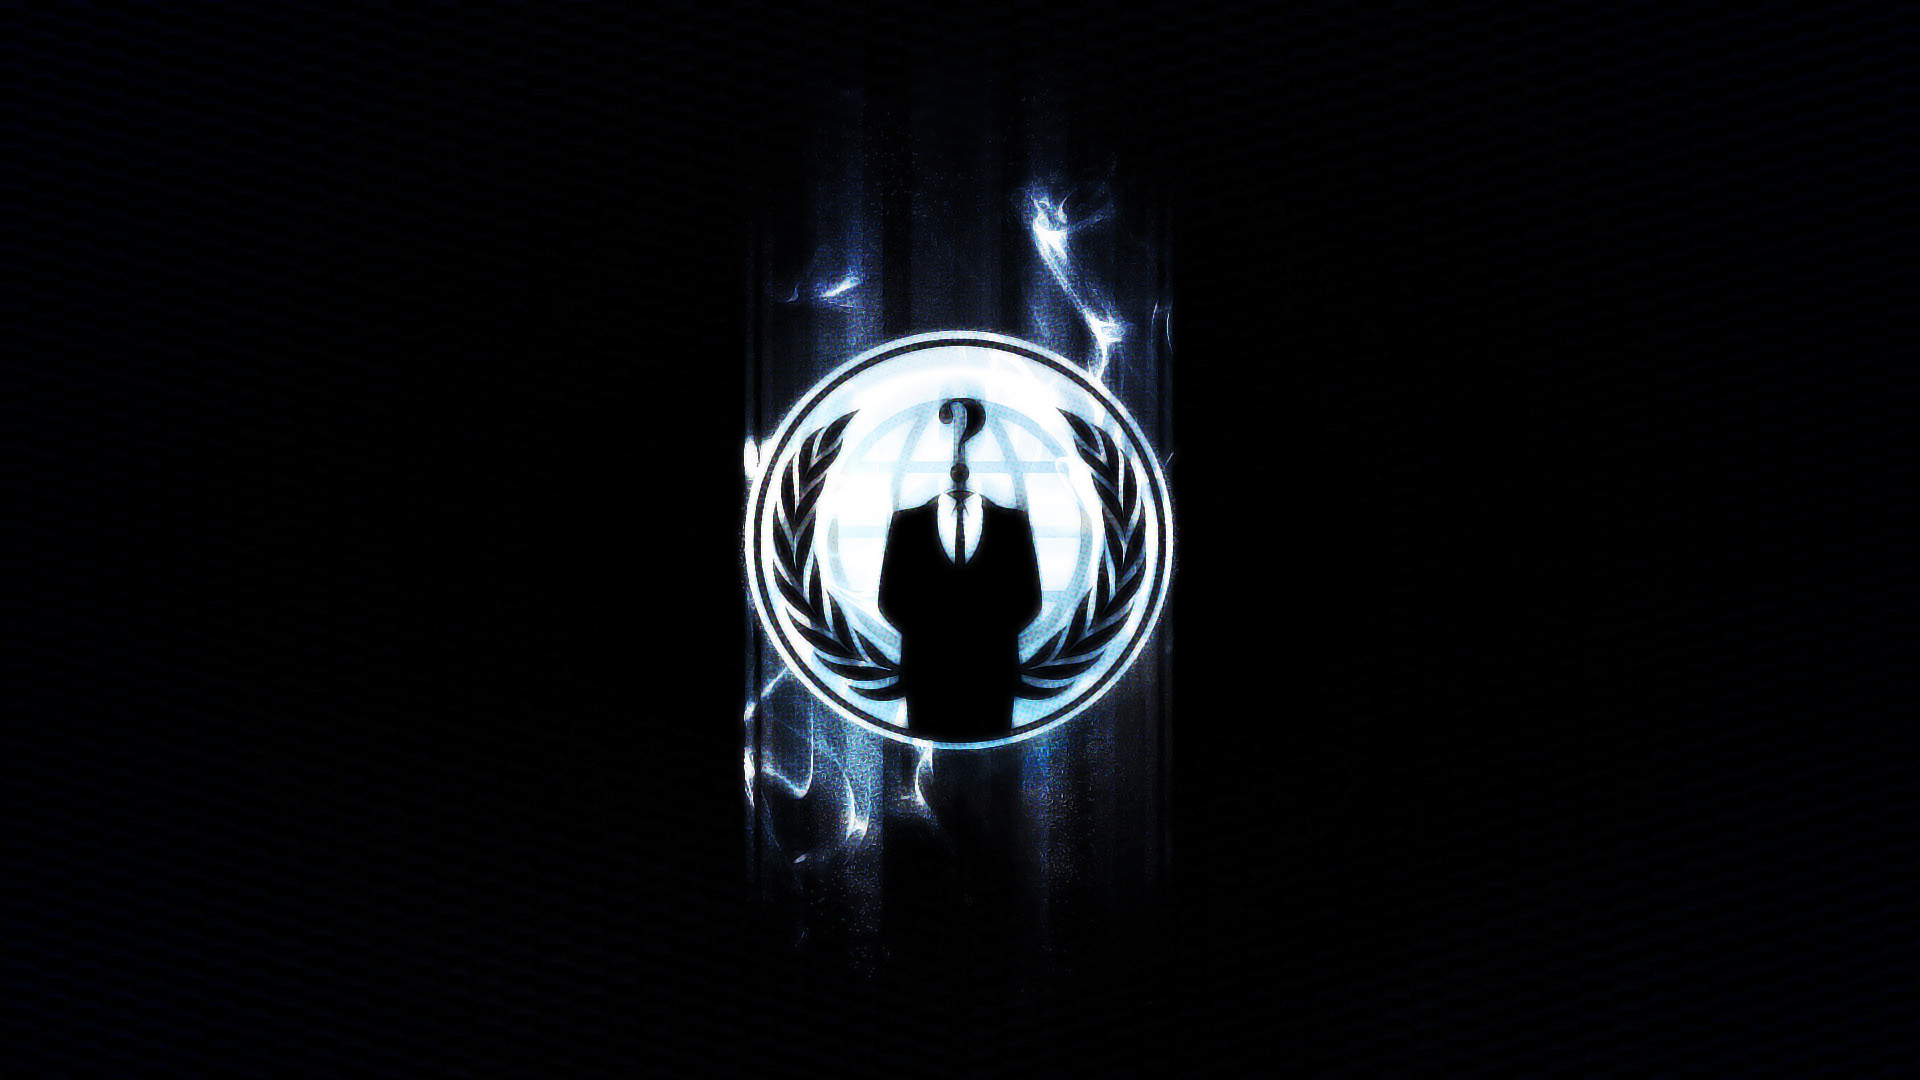  Anonymous hackers clan logo enjoy this Anonymous Wallpaper in high